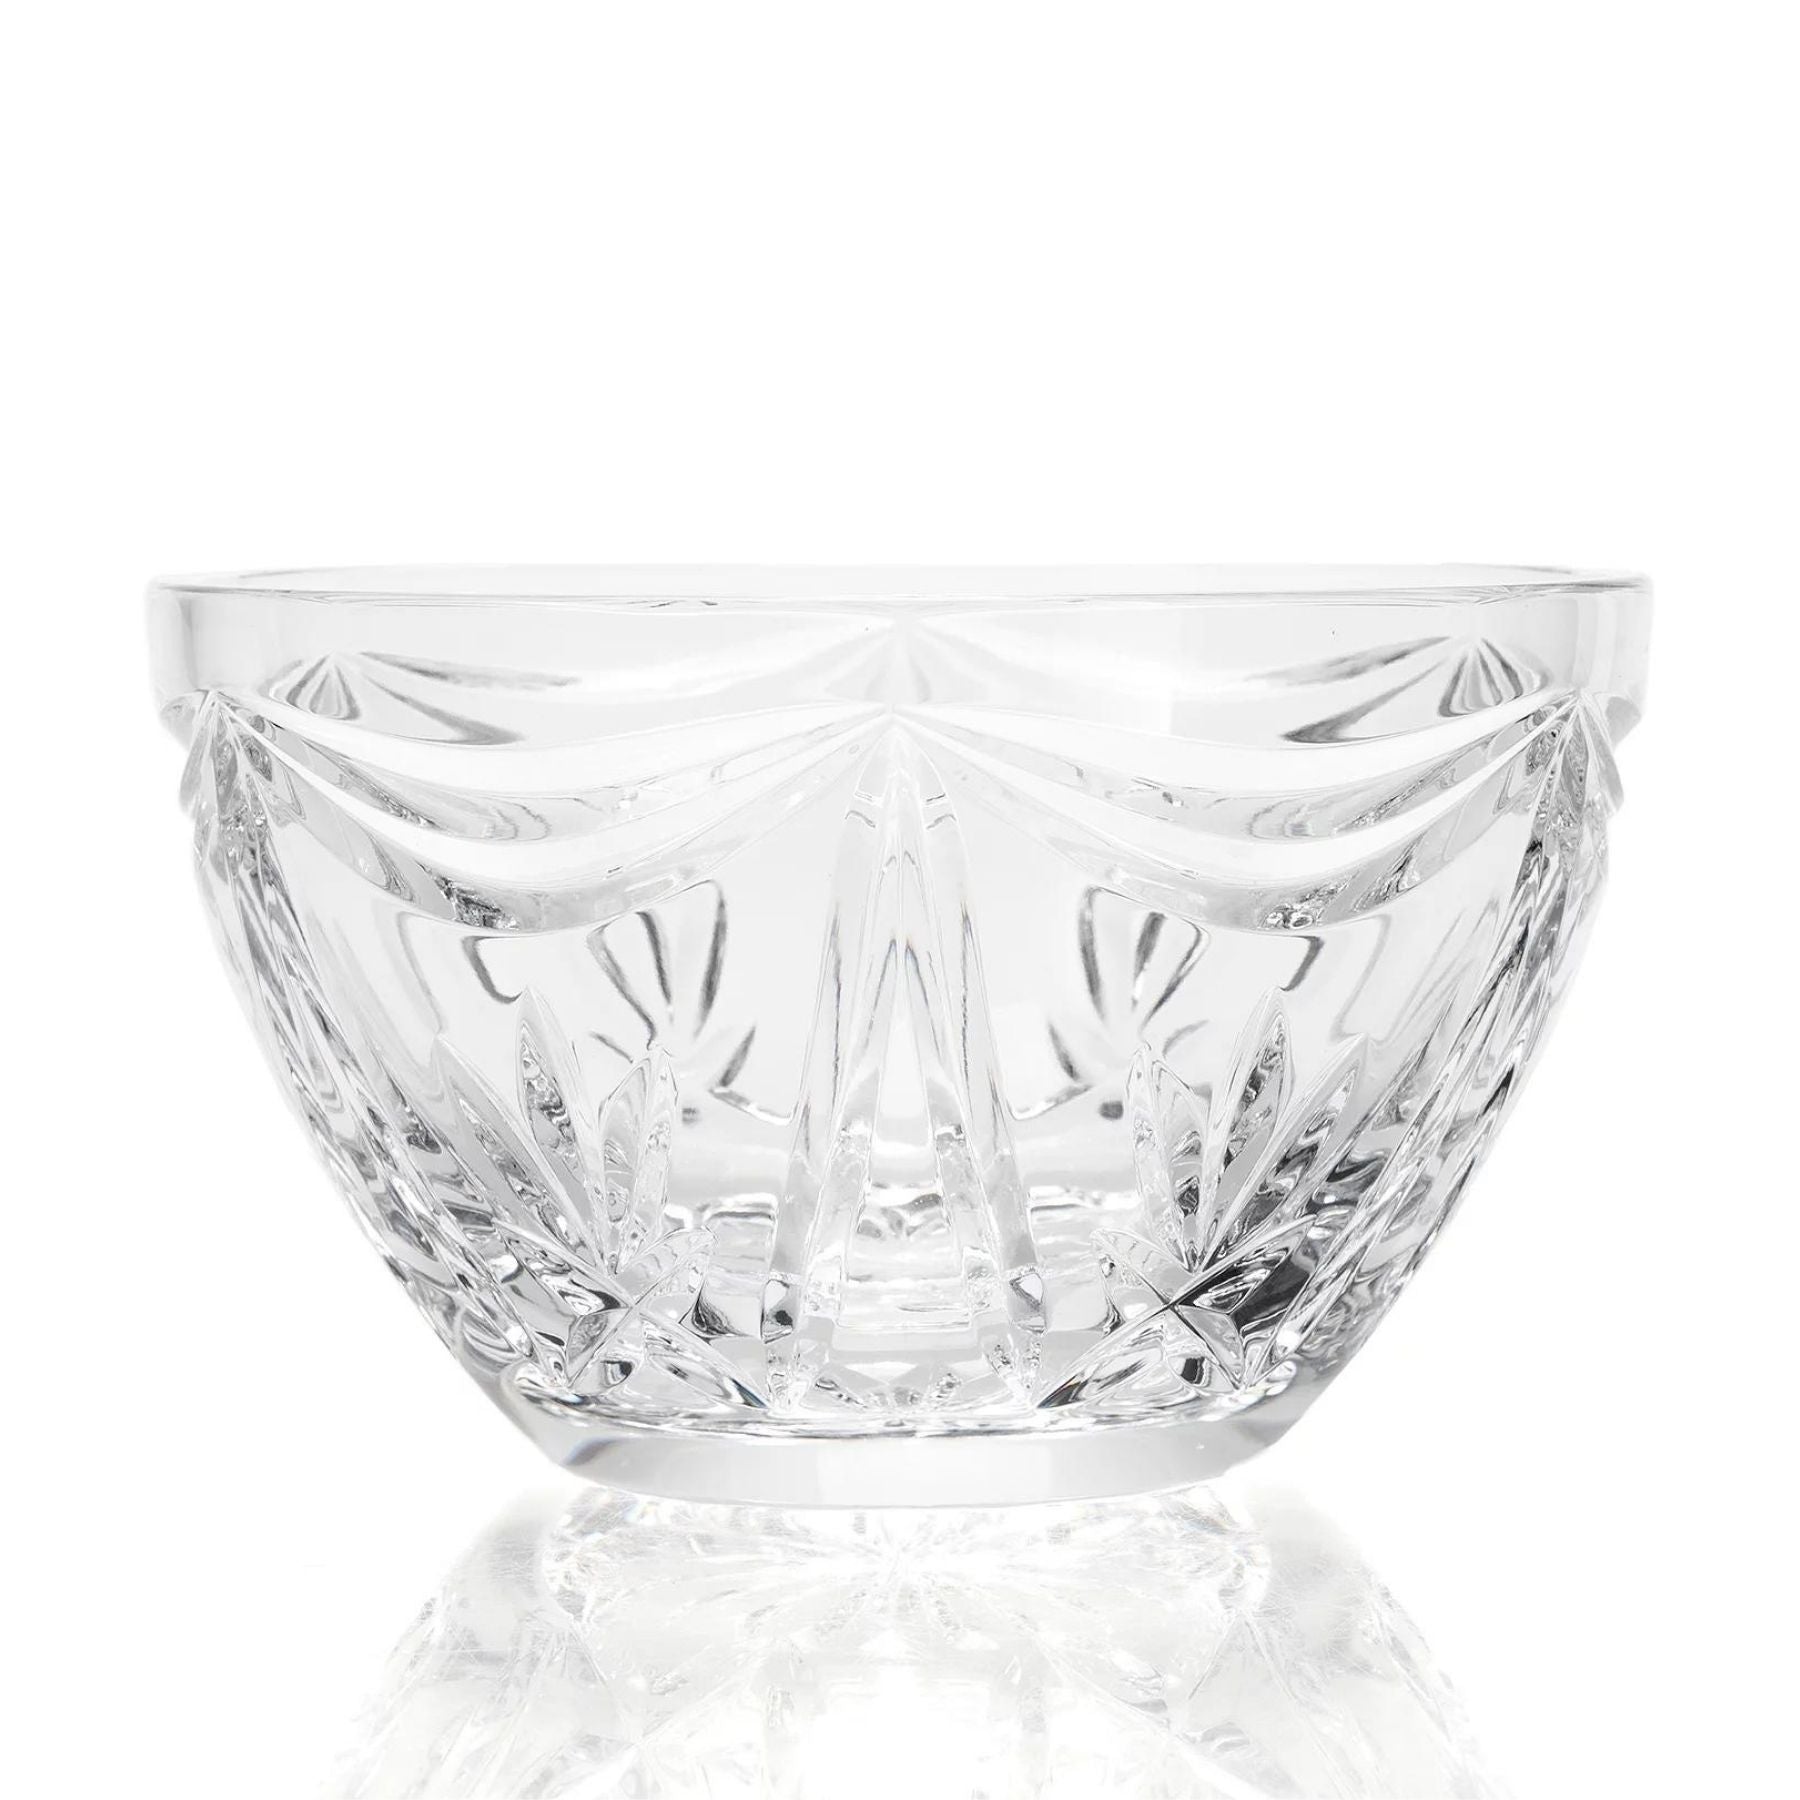 Waterford Crystal Heritage Variety Bowl 5"  Stunning crystal bowl, crystal variety bowl with eye-catching accents, sure to make a statement in any home. Discover Waterford's collection of crystal bowls with intricately cut patterns and contemporary shapes.